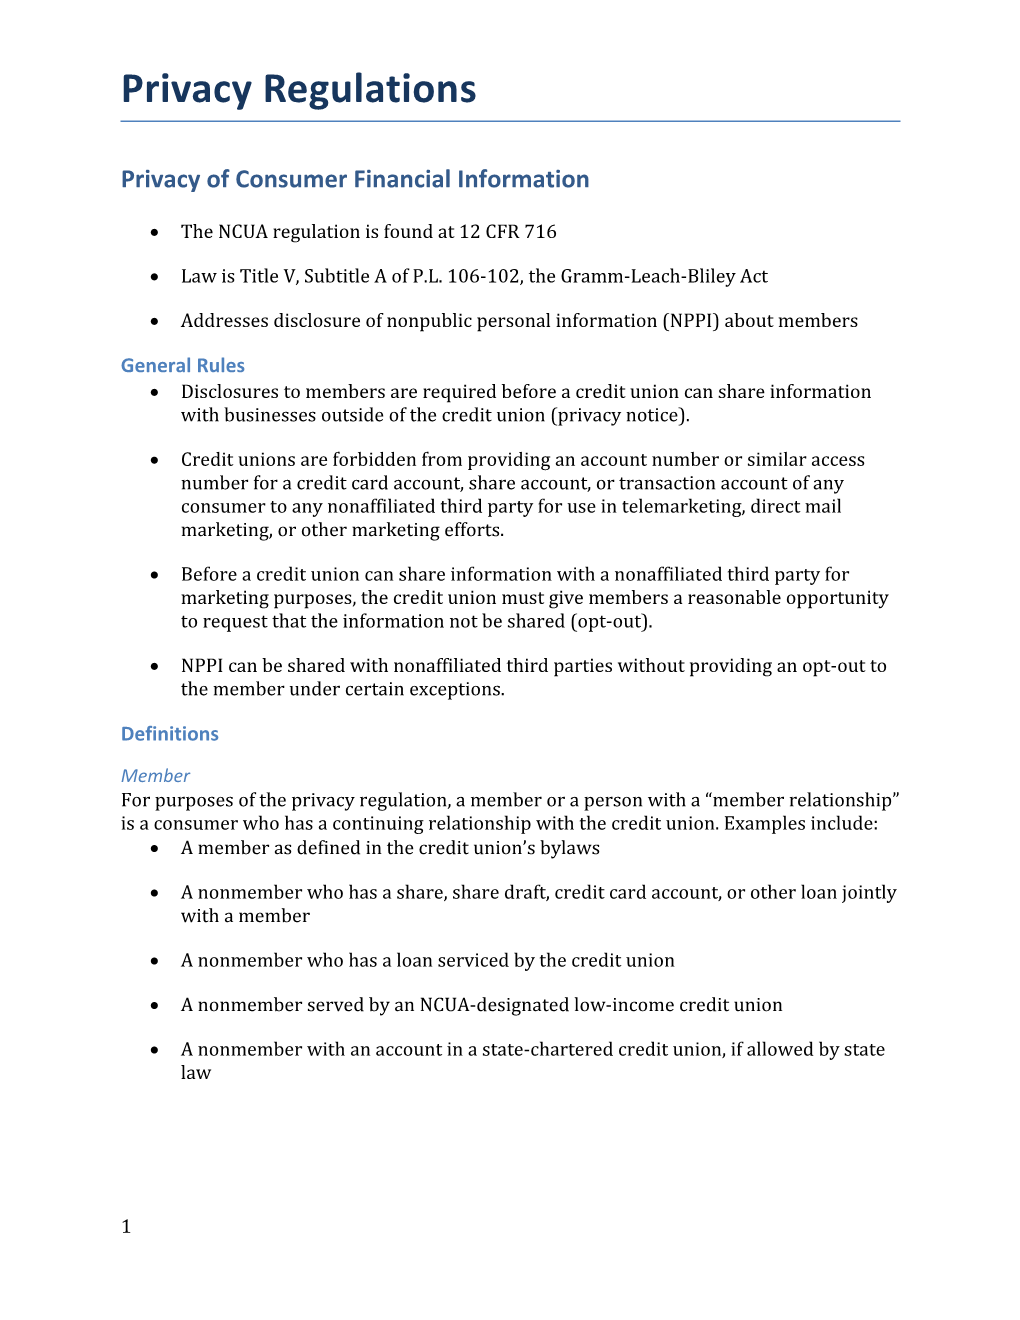 Privacy of Consumer Financial Information